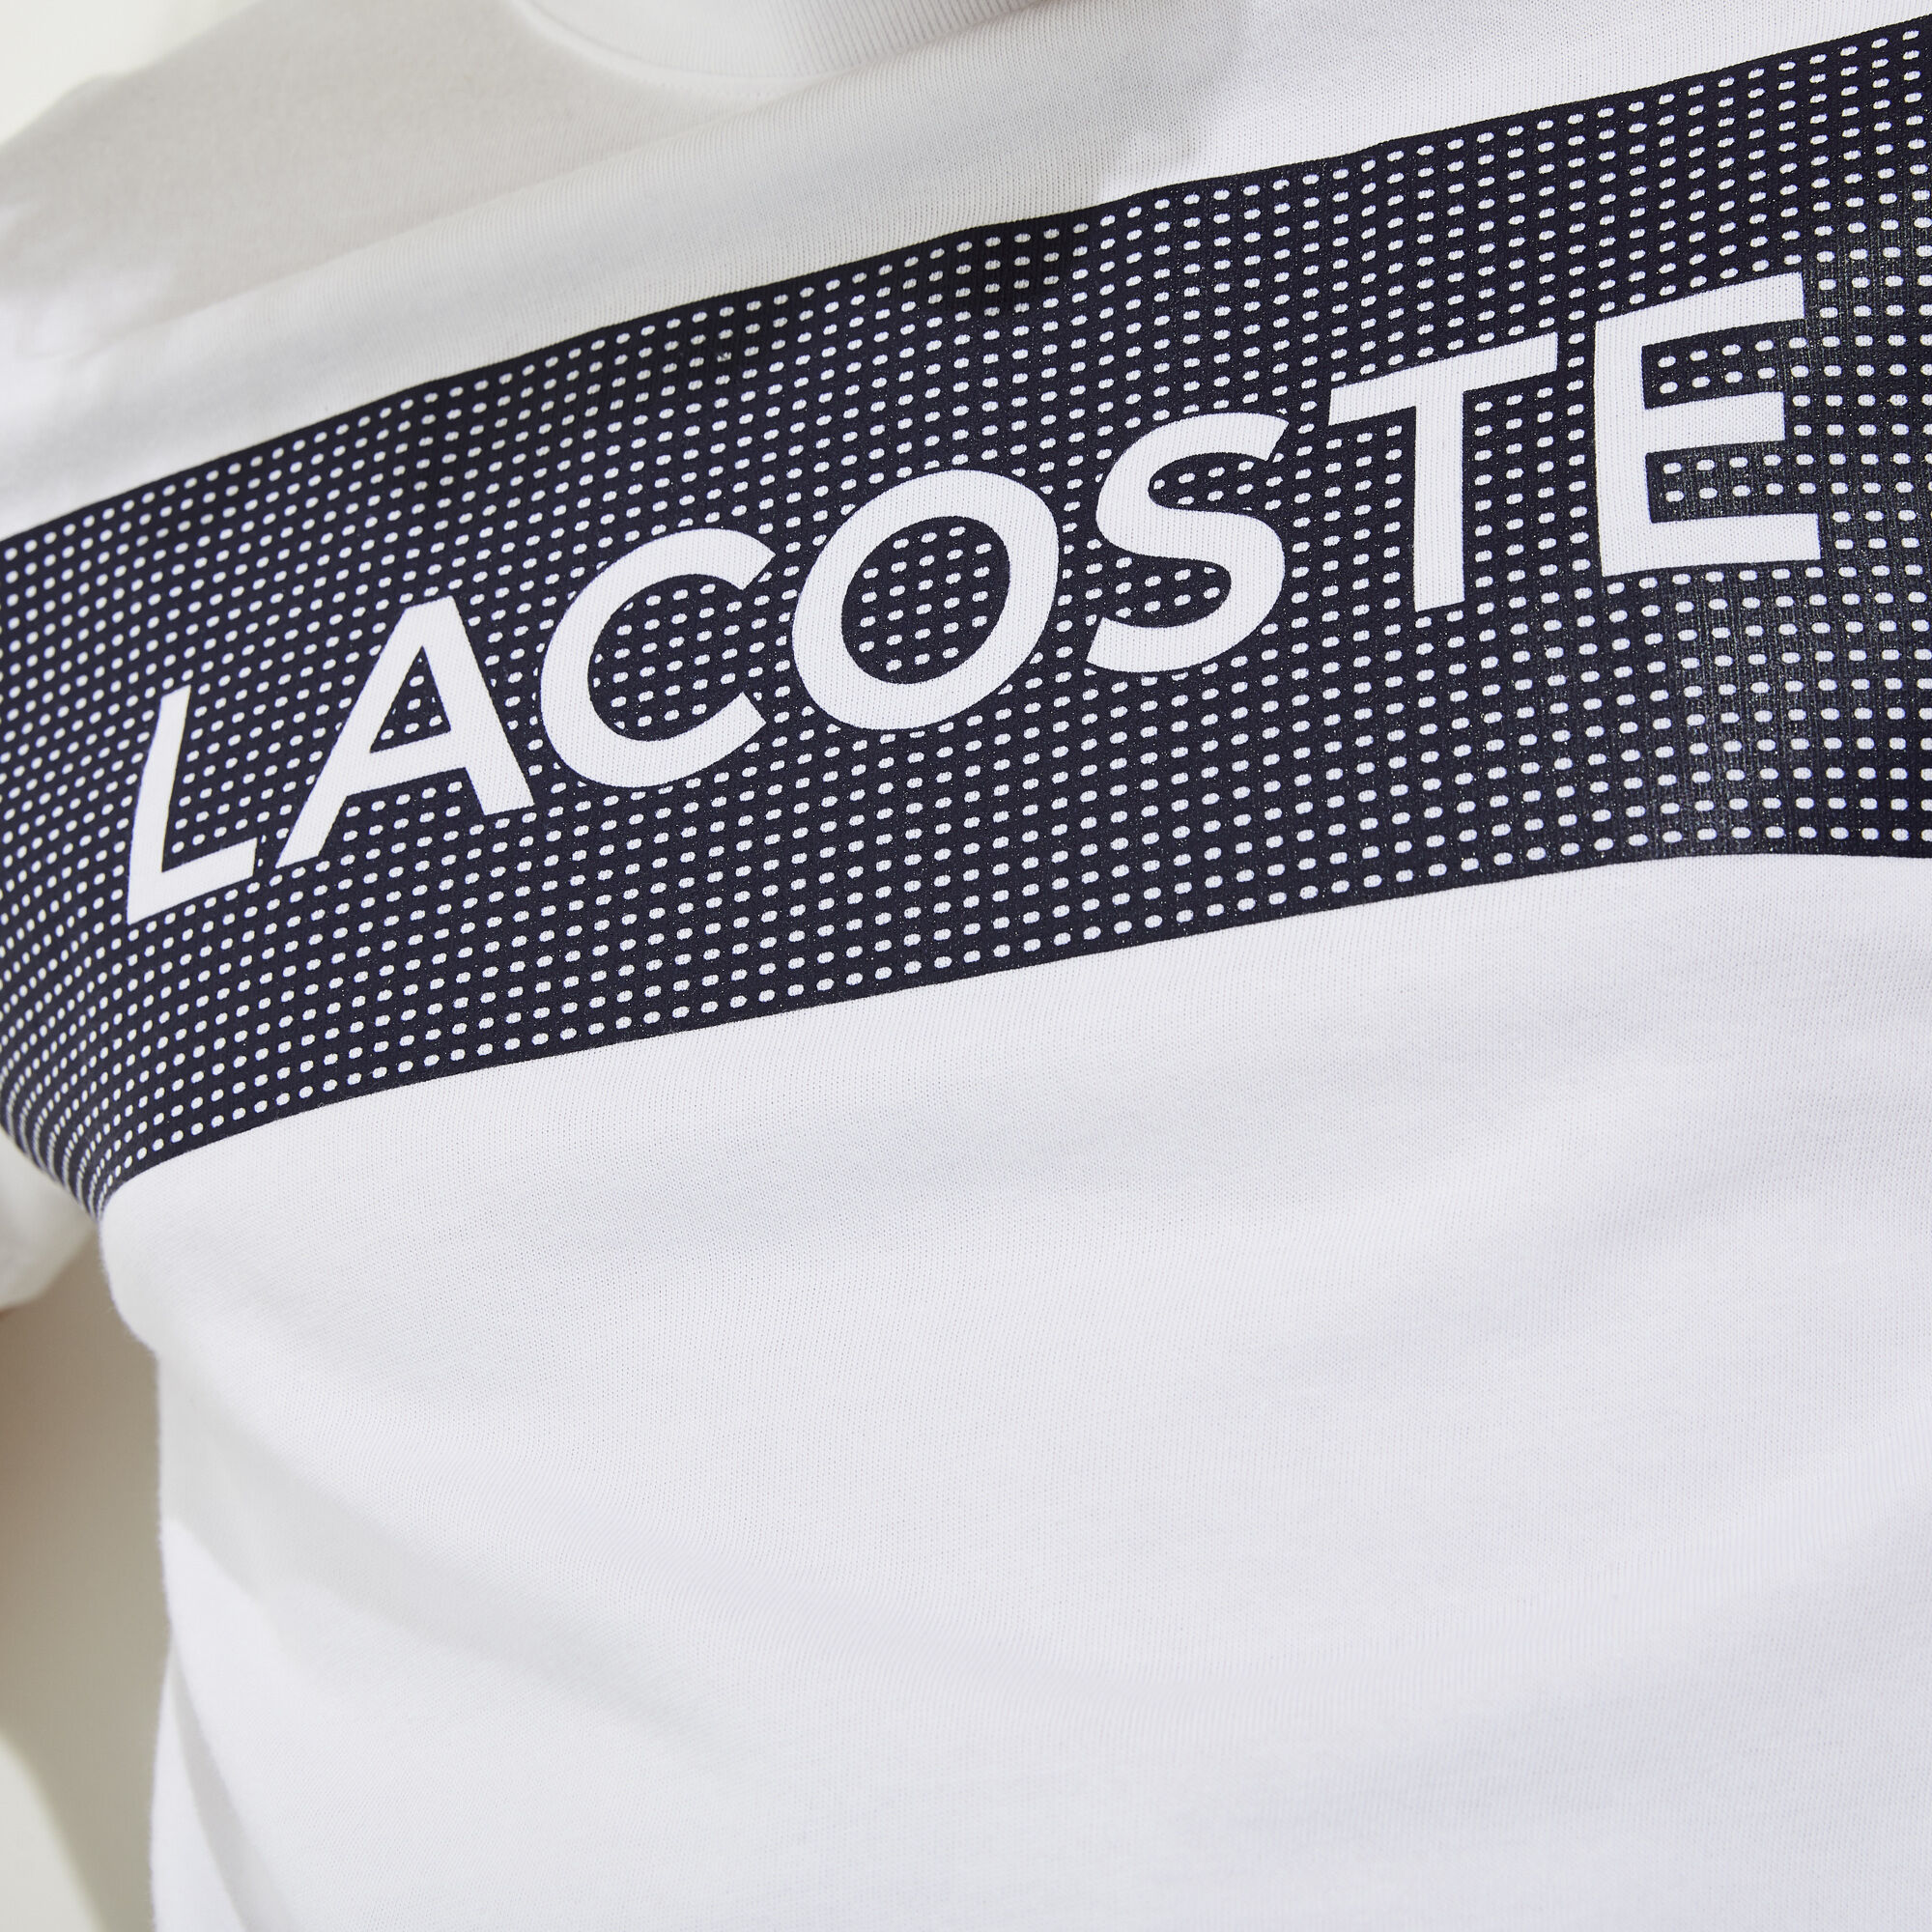 Men's Lacoste SPORT Printed Breathable T-shirt